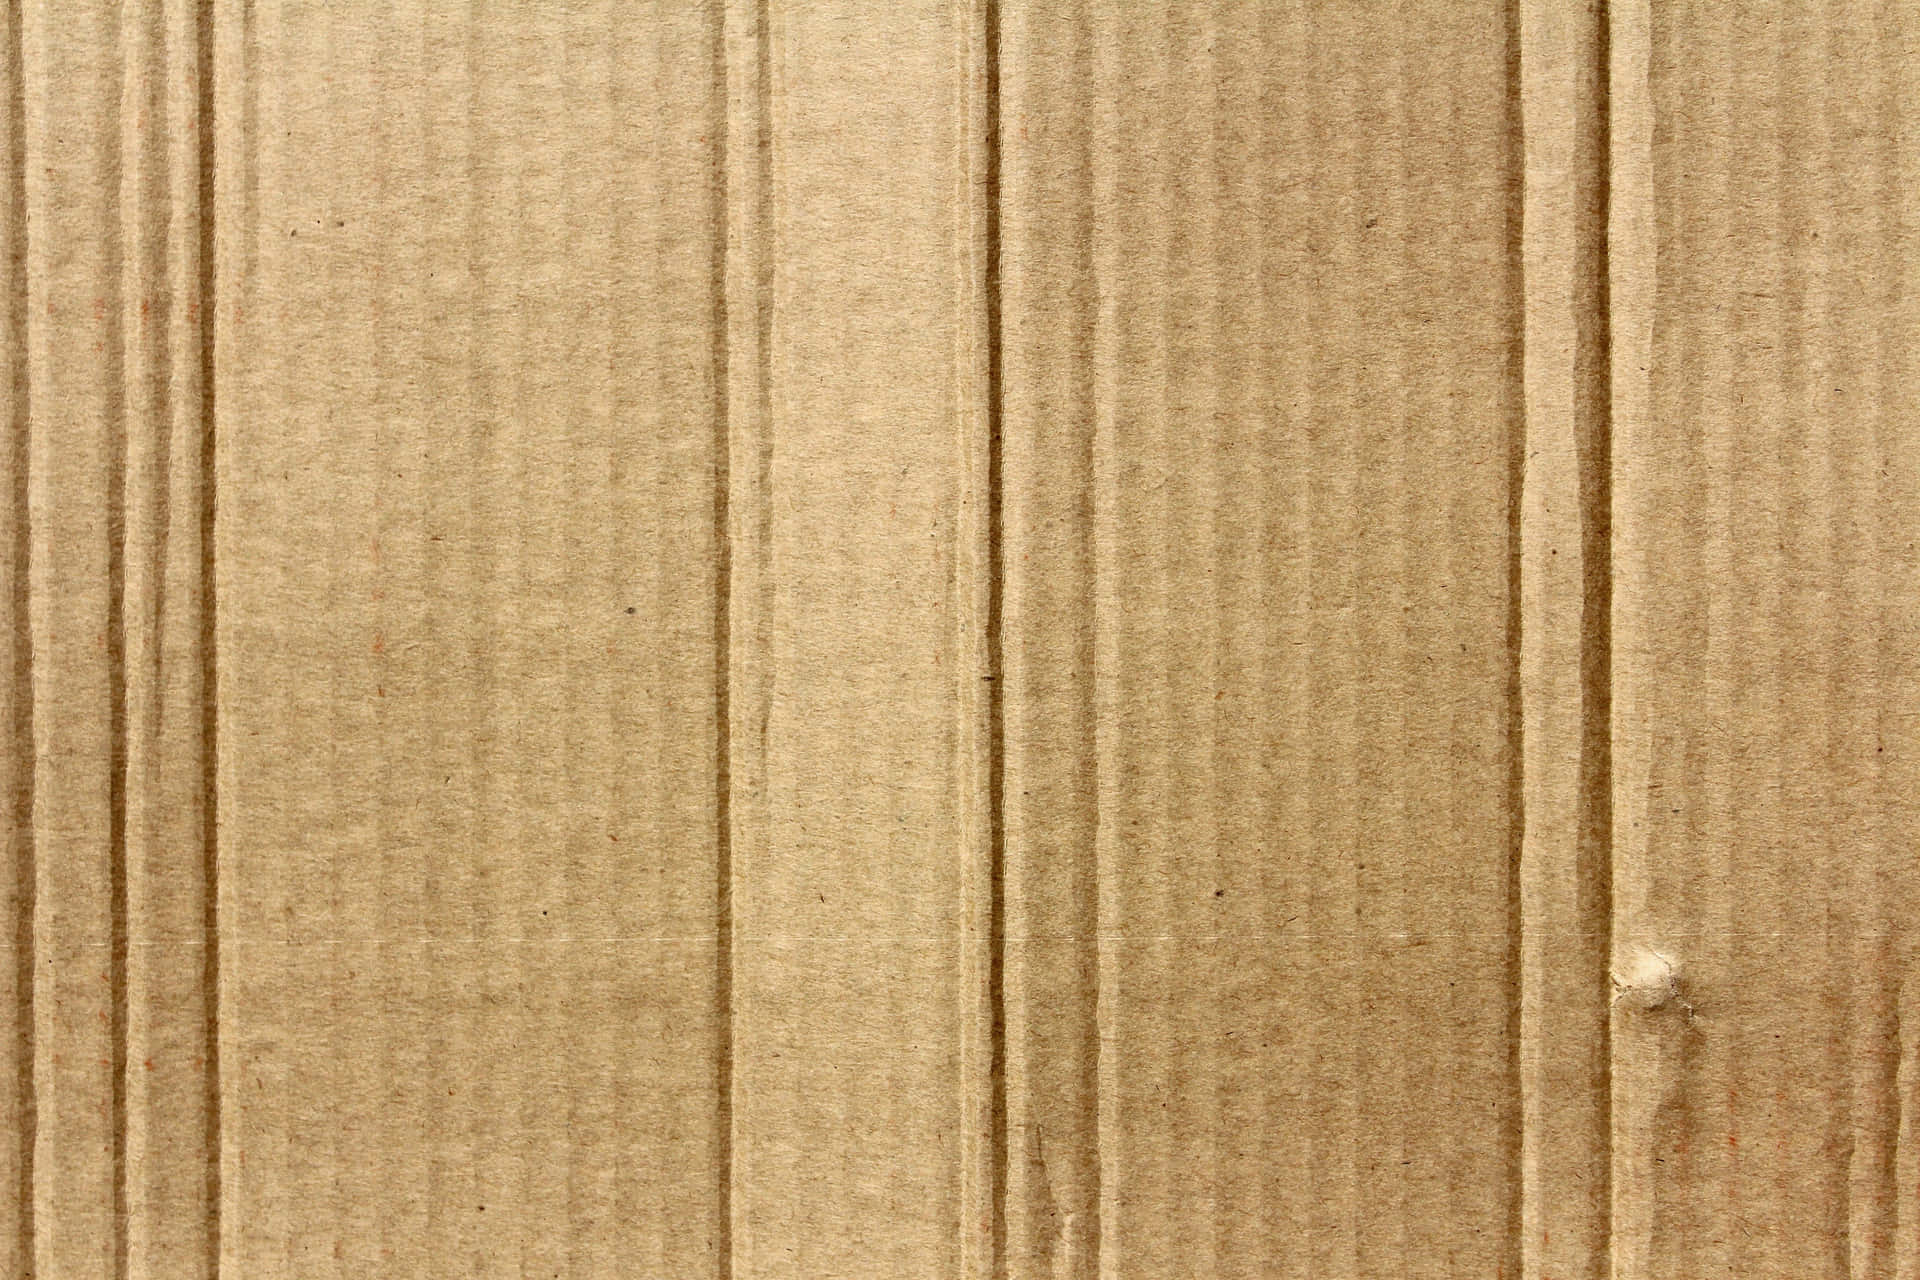 Cardboard background for creative projects